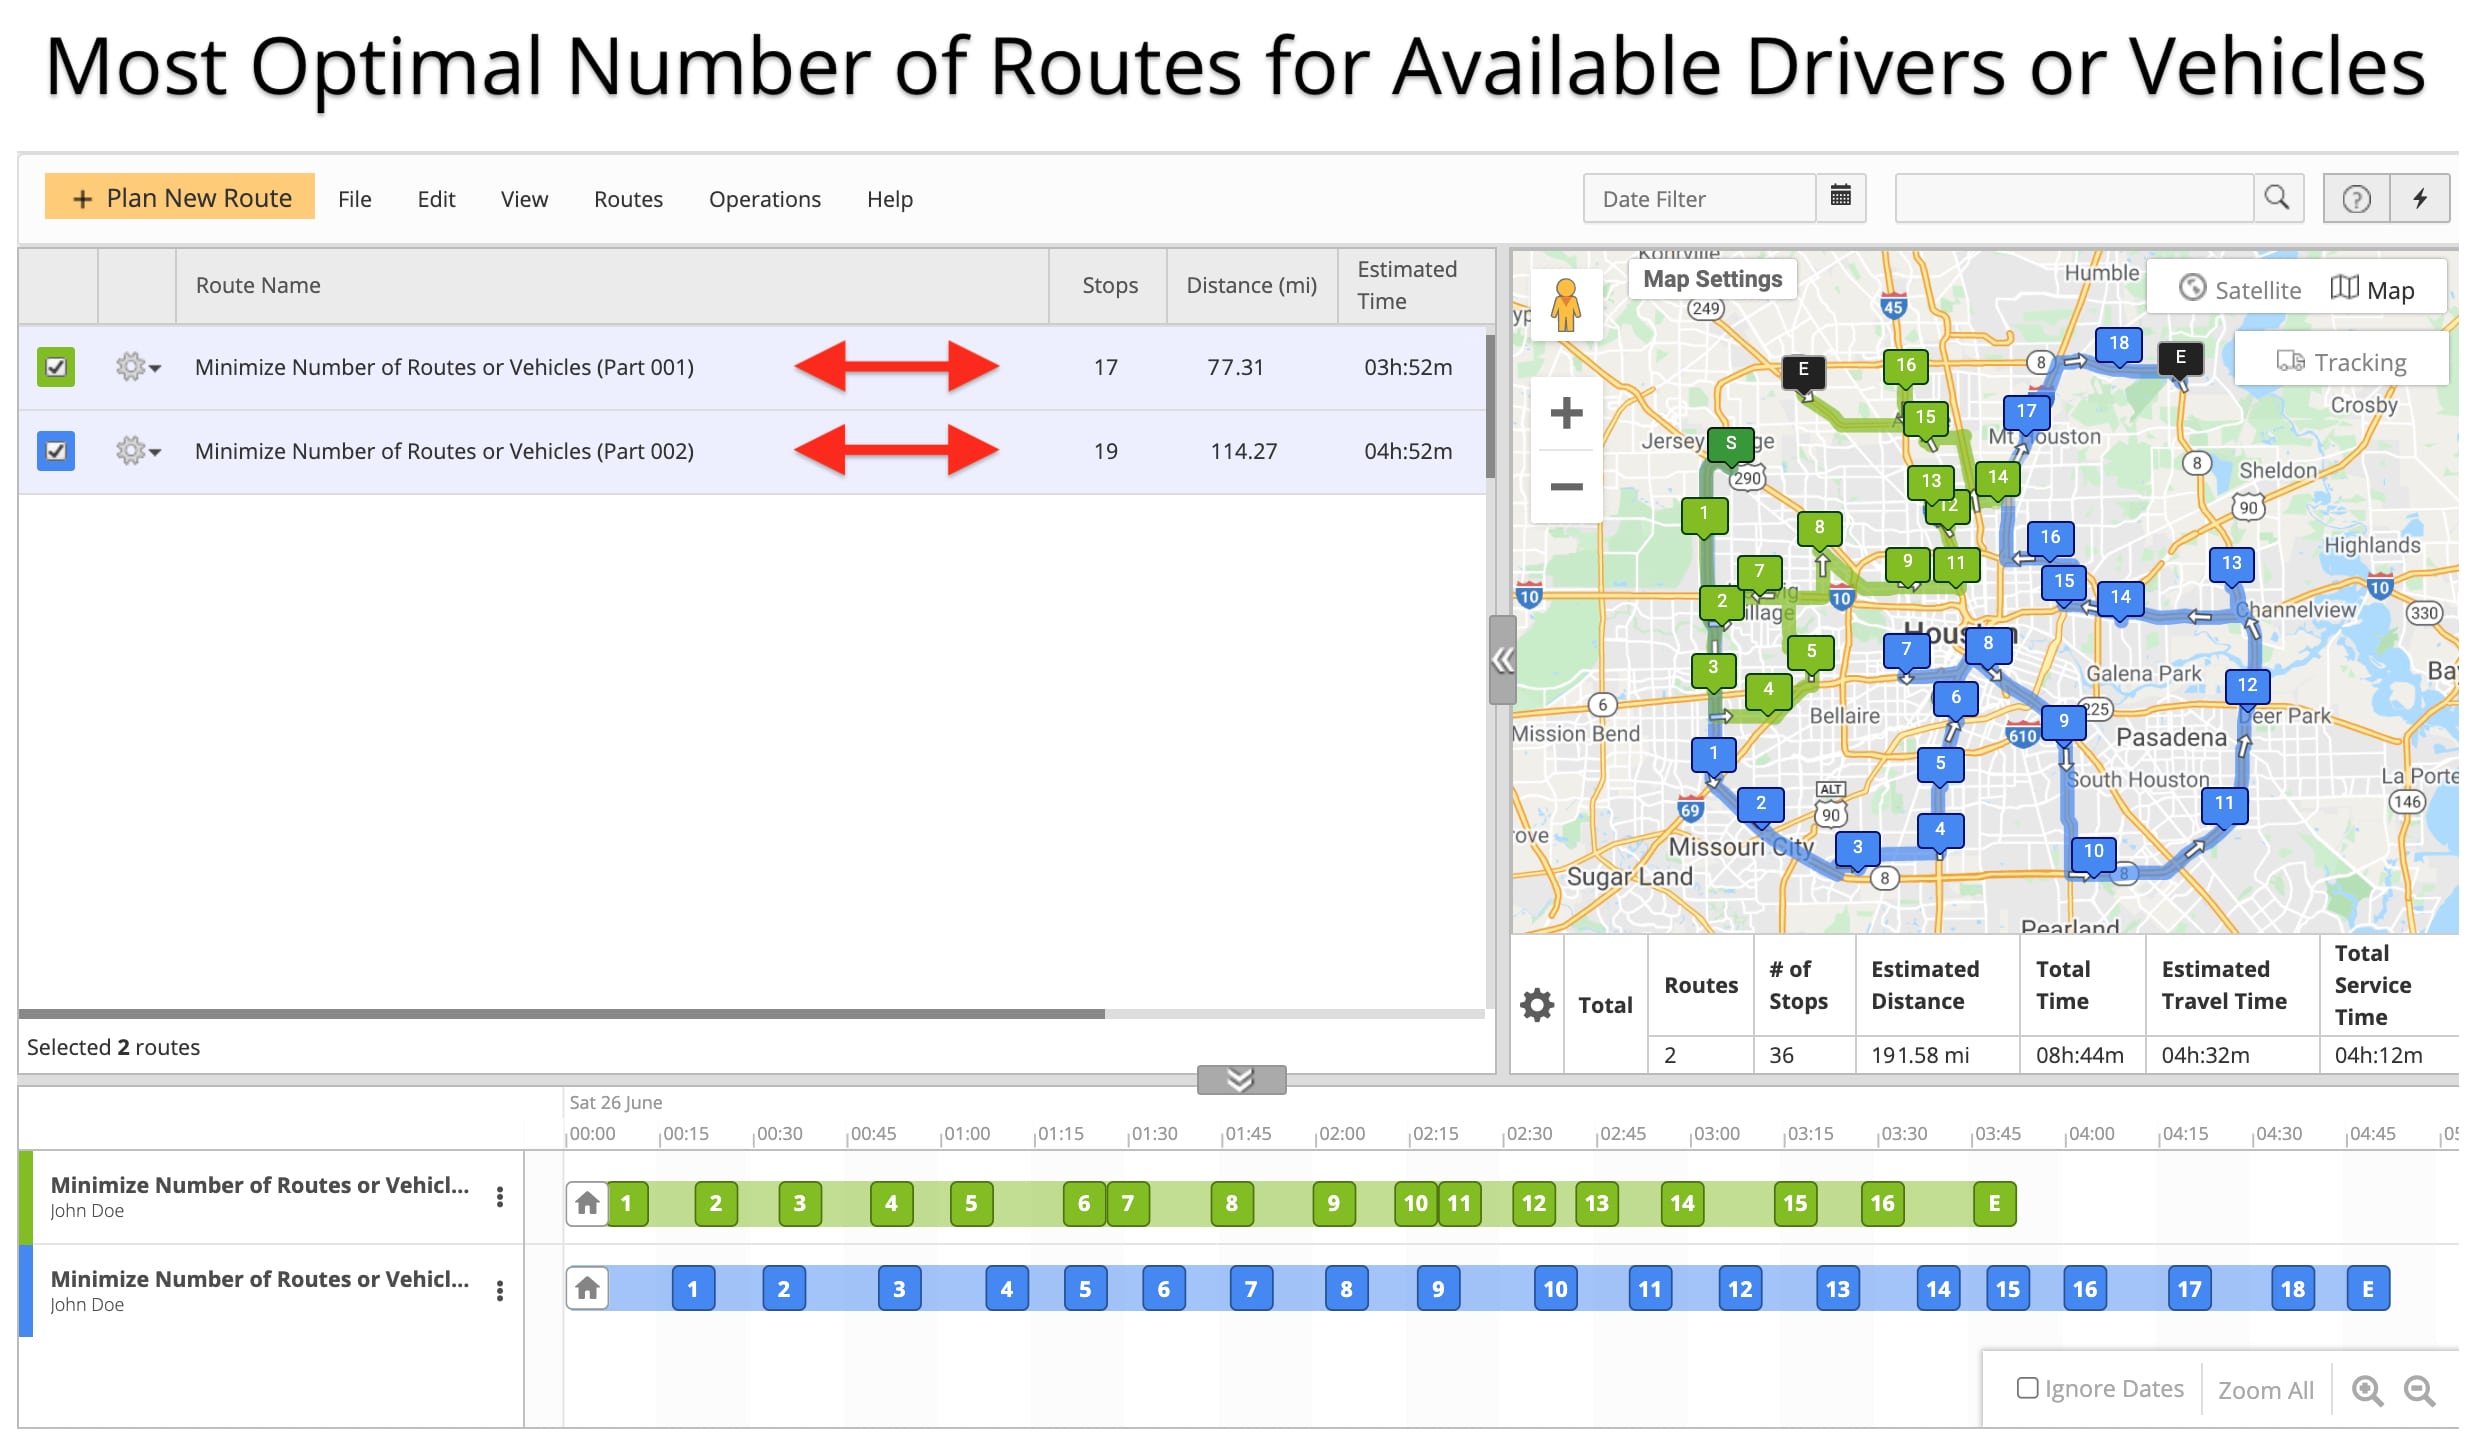 Route4Me plans an optimal number of routes based on the number of available drivers and vehicles.